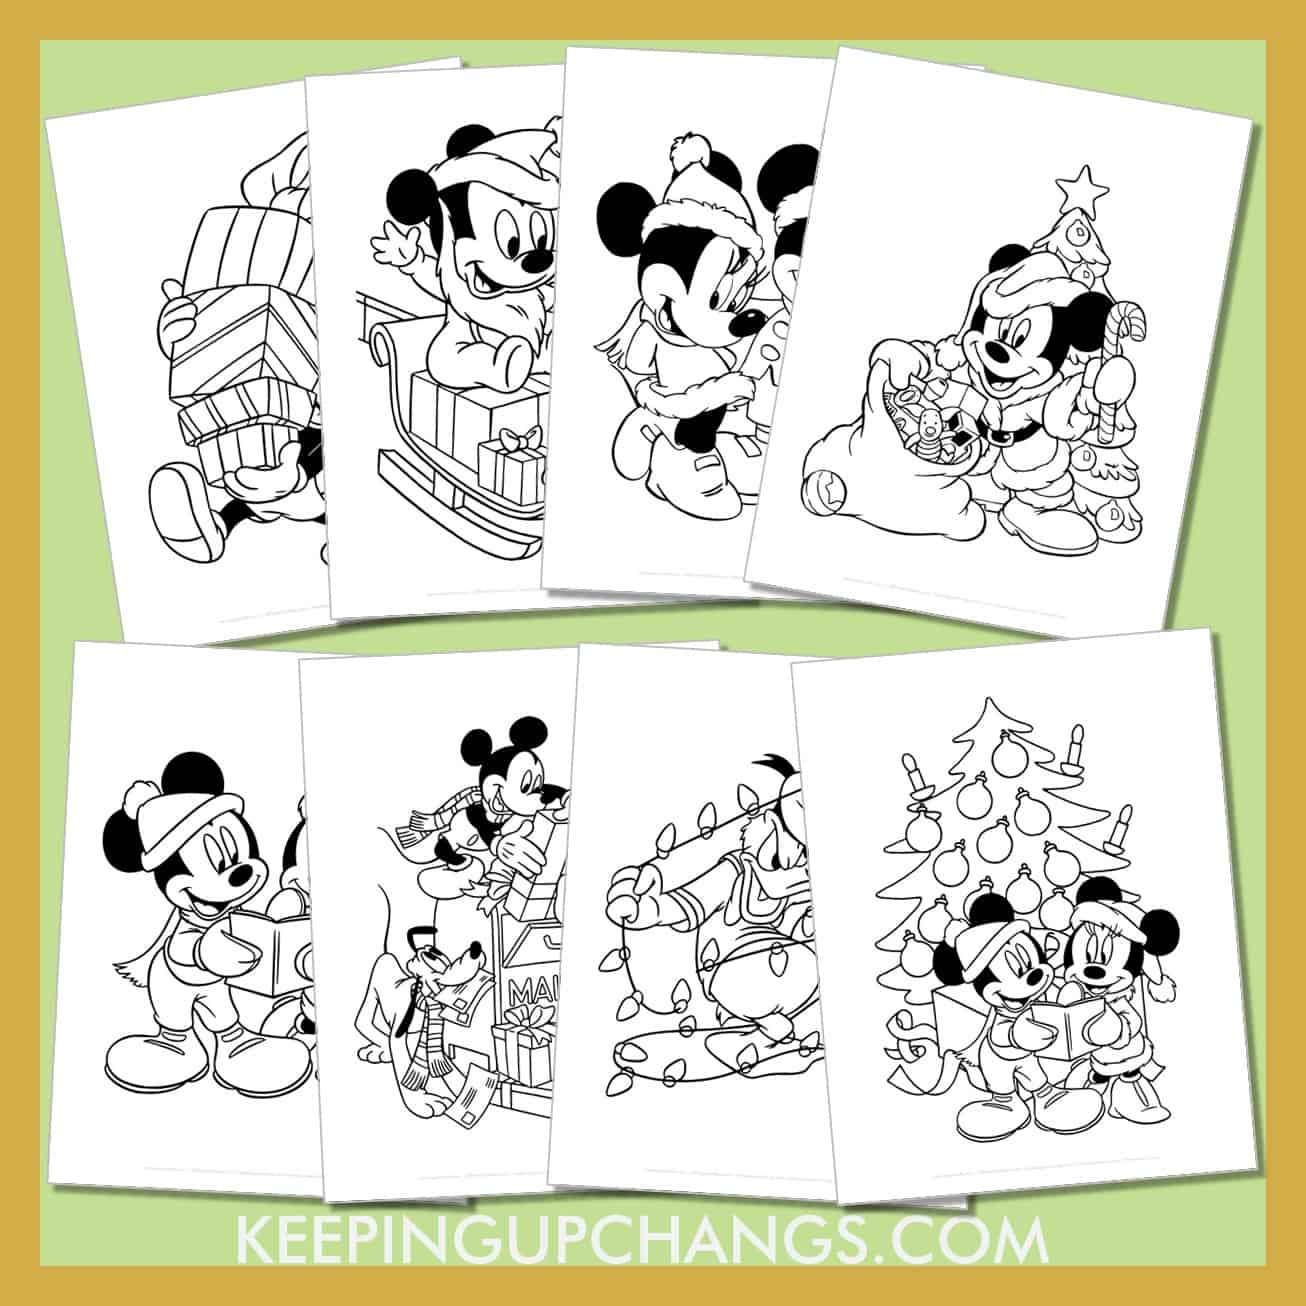 free mickey mouse christmas pictures to color for toddlers, kids, adults.